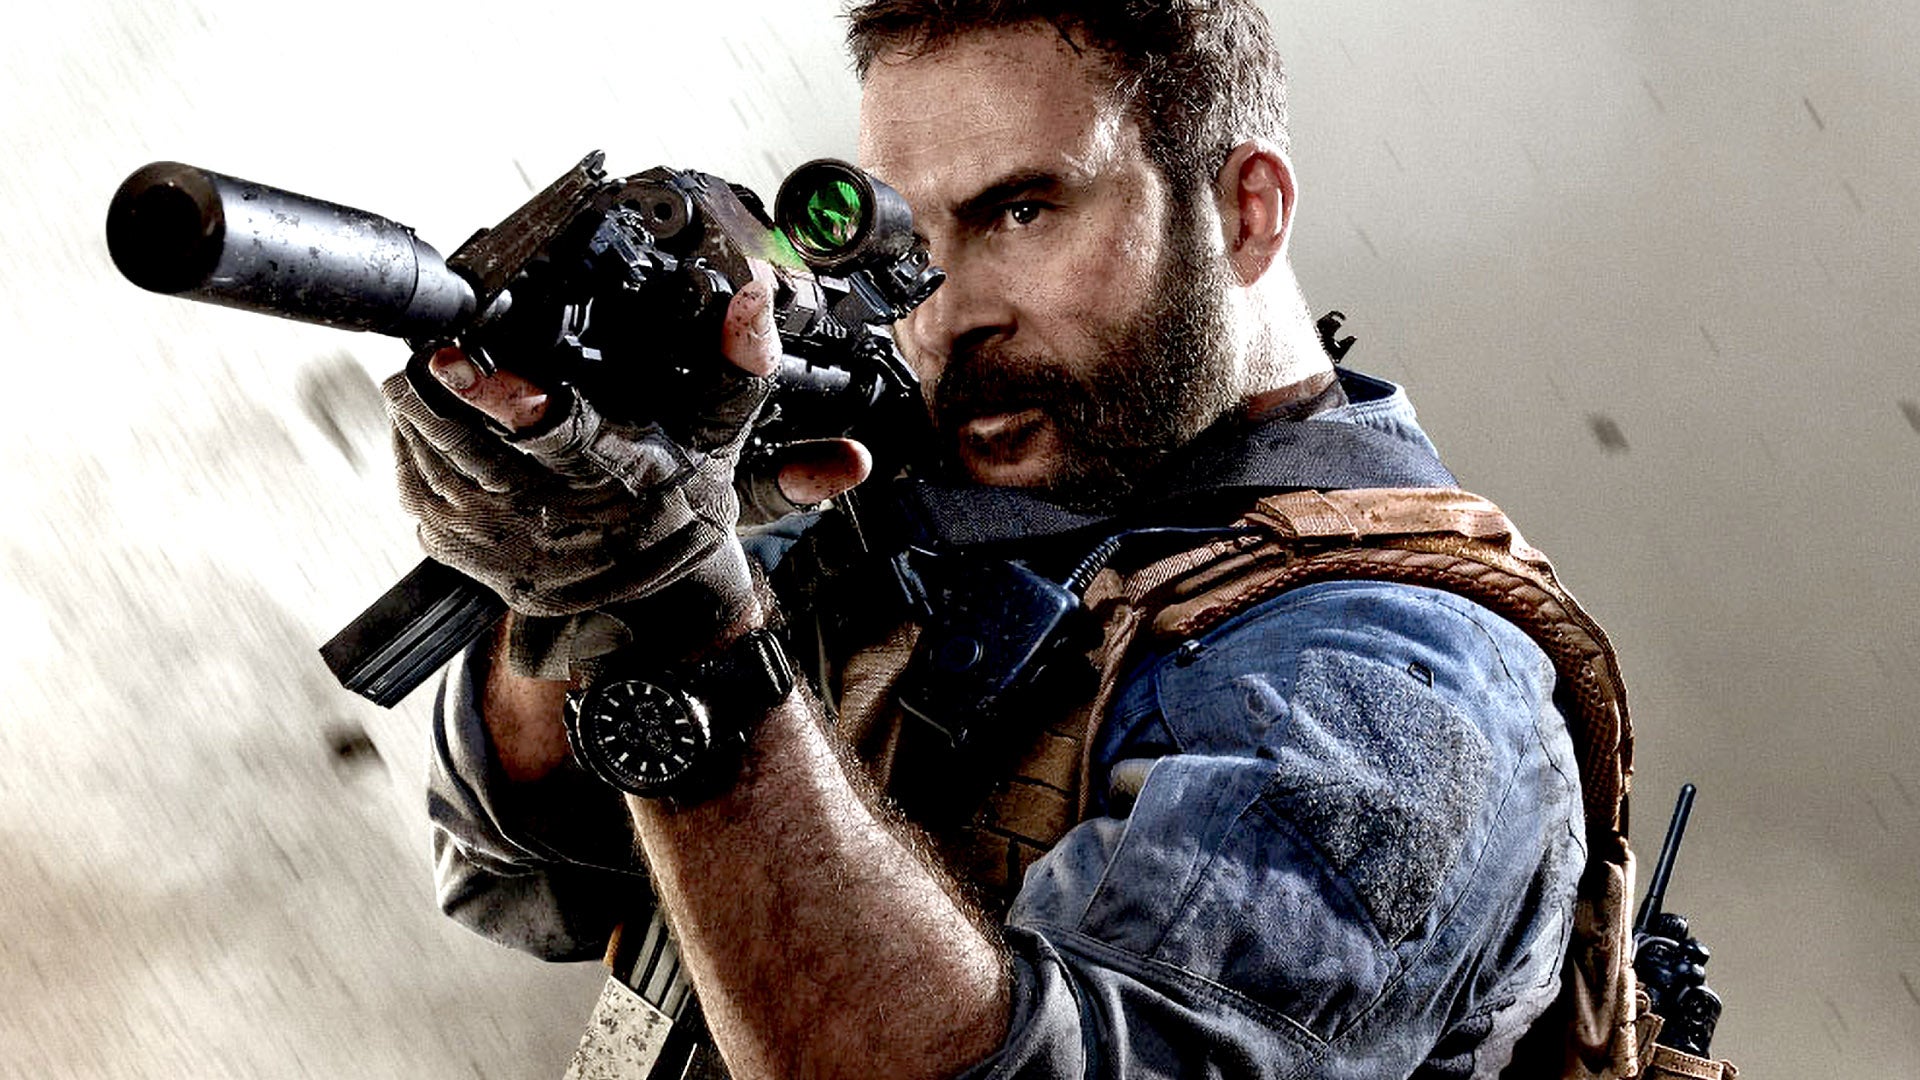 Image for DF Direct #12: Call of Duty Modern Warfare - New Tech Details + MP Gameplay Footage!